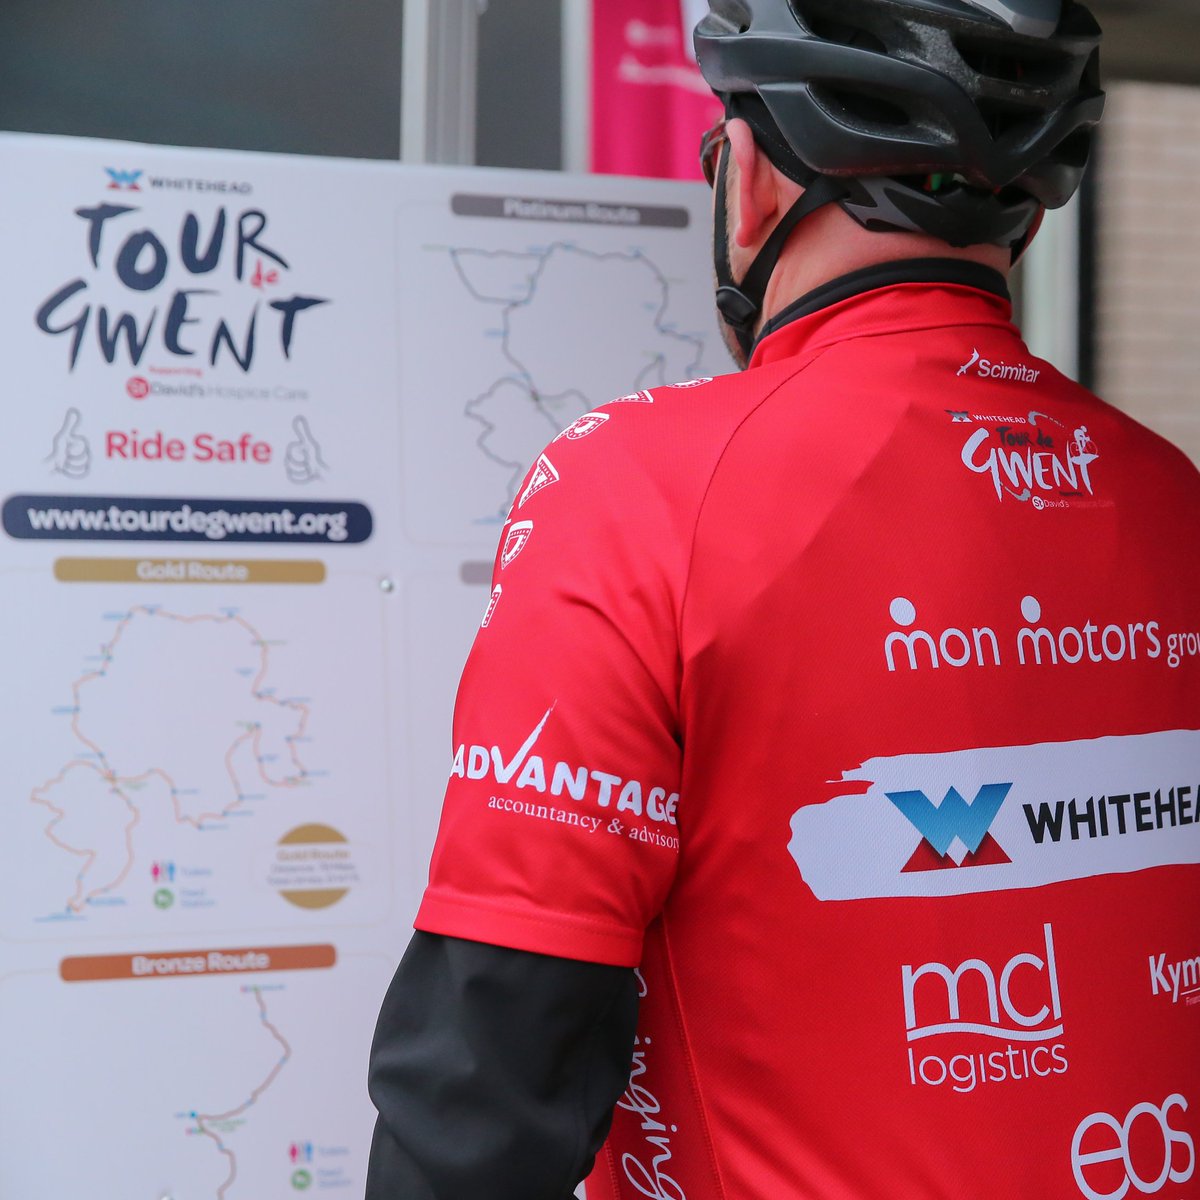 Want to sponsor our 2024 ride? We're on the lookout for sponsors 👀 Your logo can be included on our popular event cycling jersey that each entrant gets to keep! Get in touch at tourdegwent@stdavidshospicecare.org or 07870 682 828 to discuss the sponsorship options available 🚲